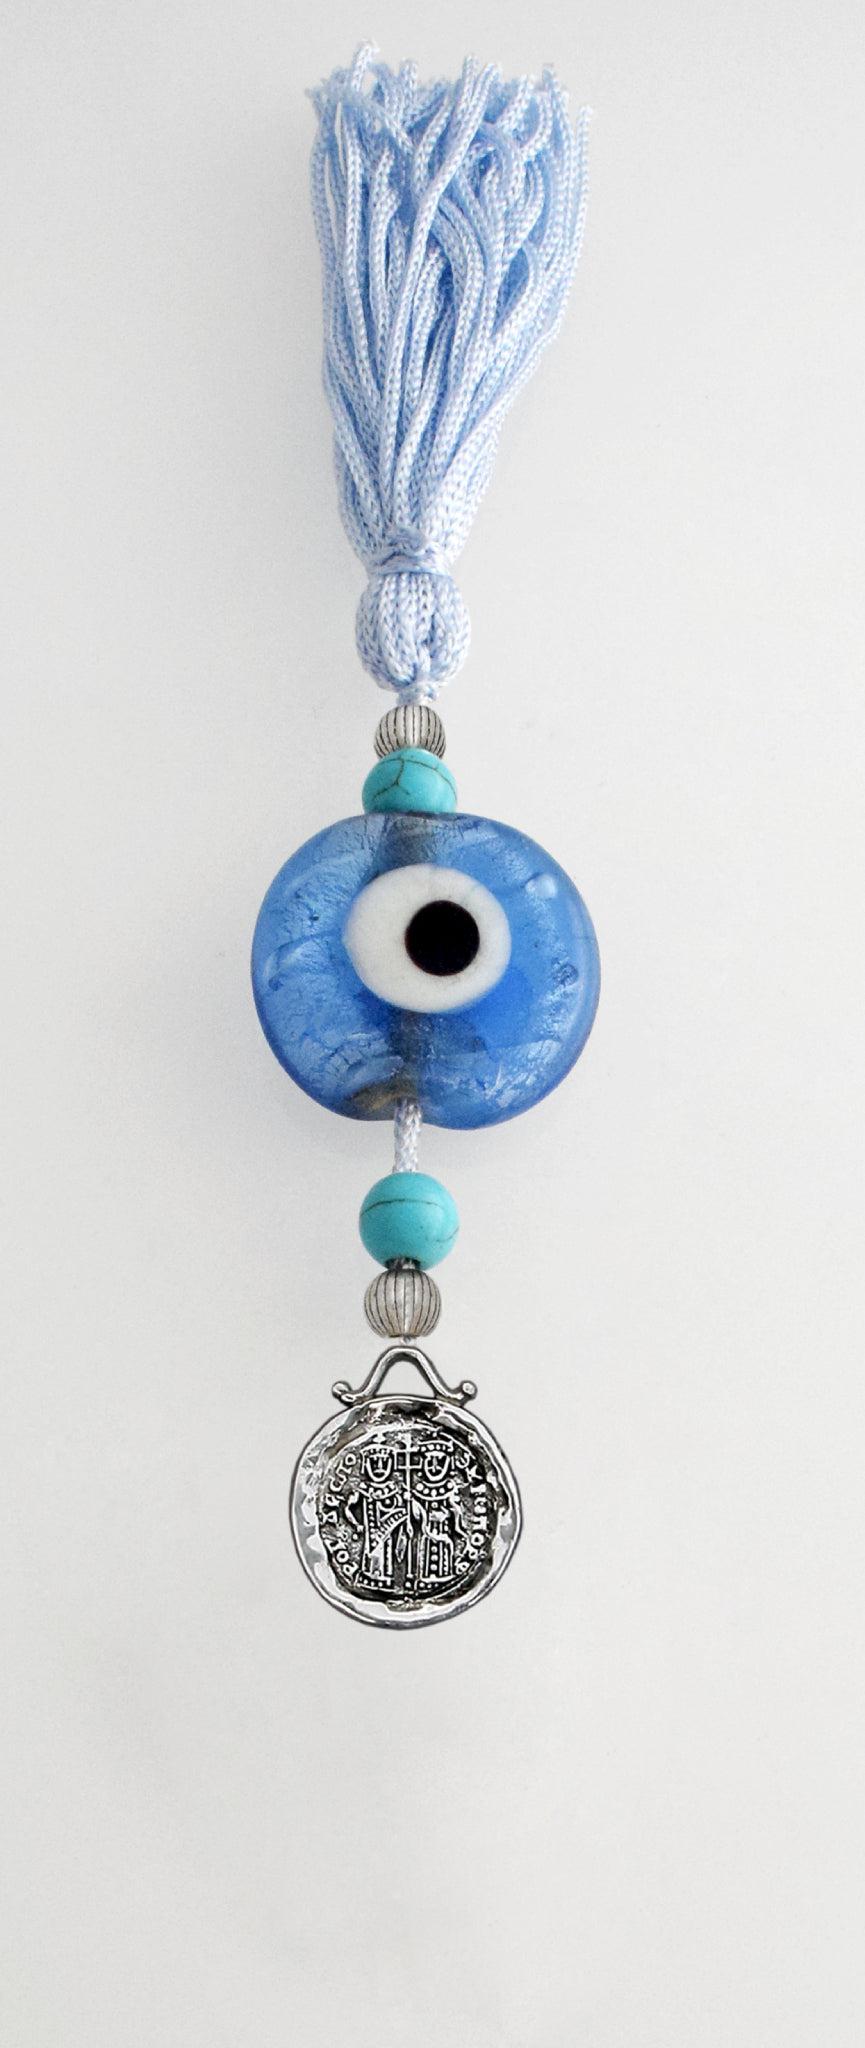 Evil Eye Charm on a tassel, House decoration, holiday decor, welcome gift, silver charm, Konstantinato Charm - ELEFTHERIOU EL